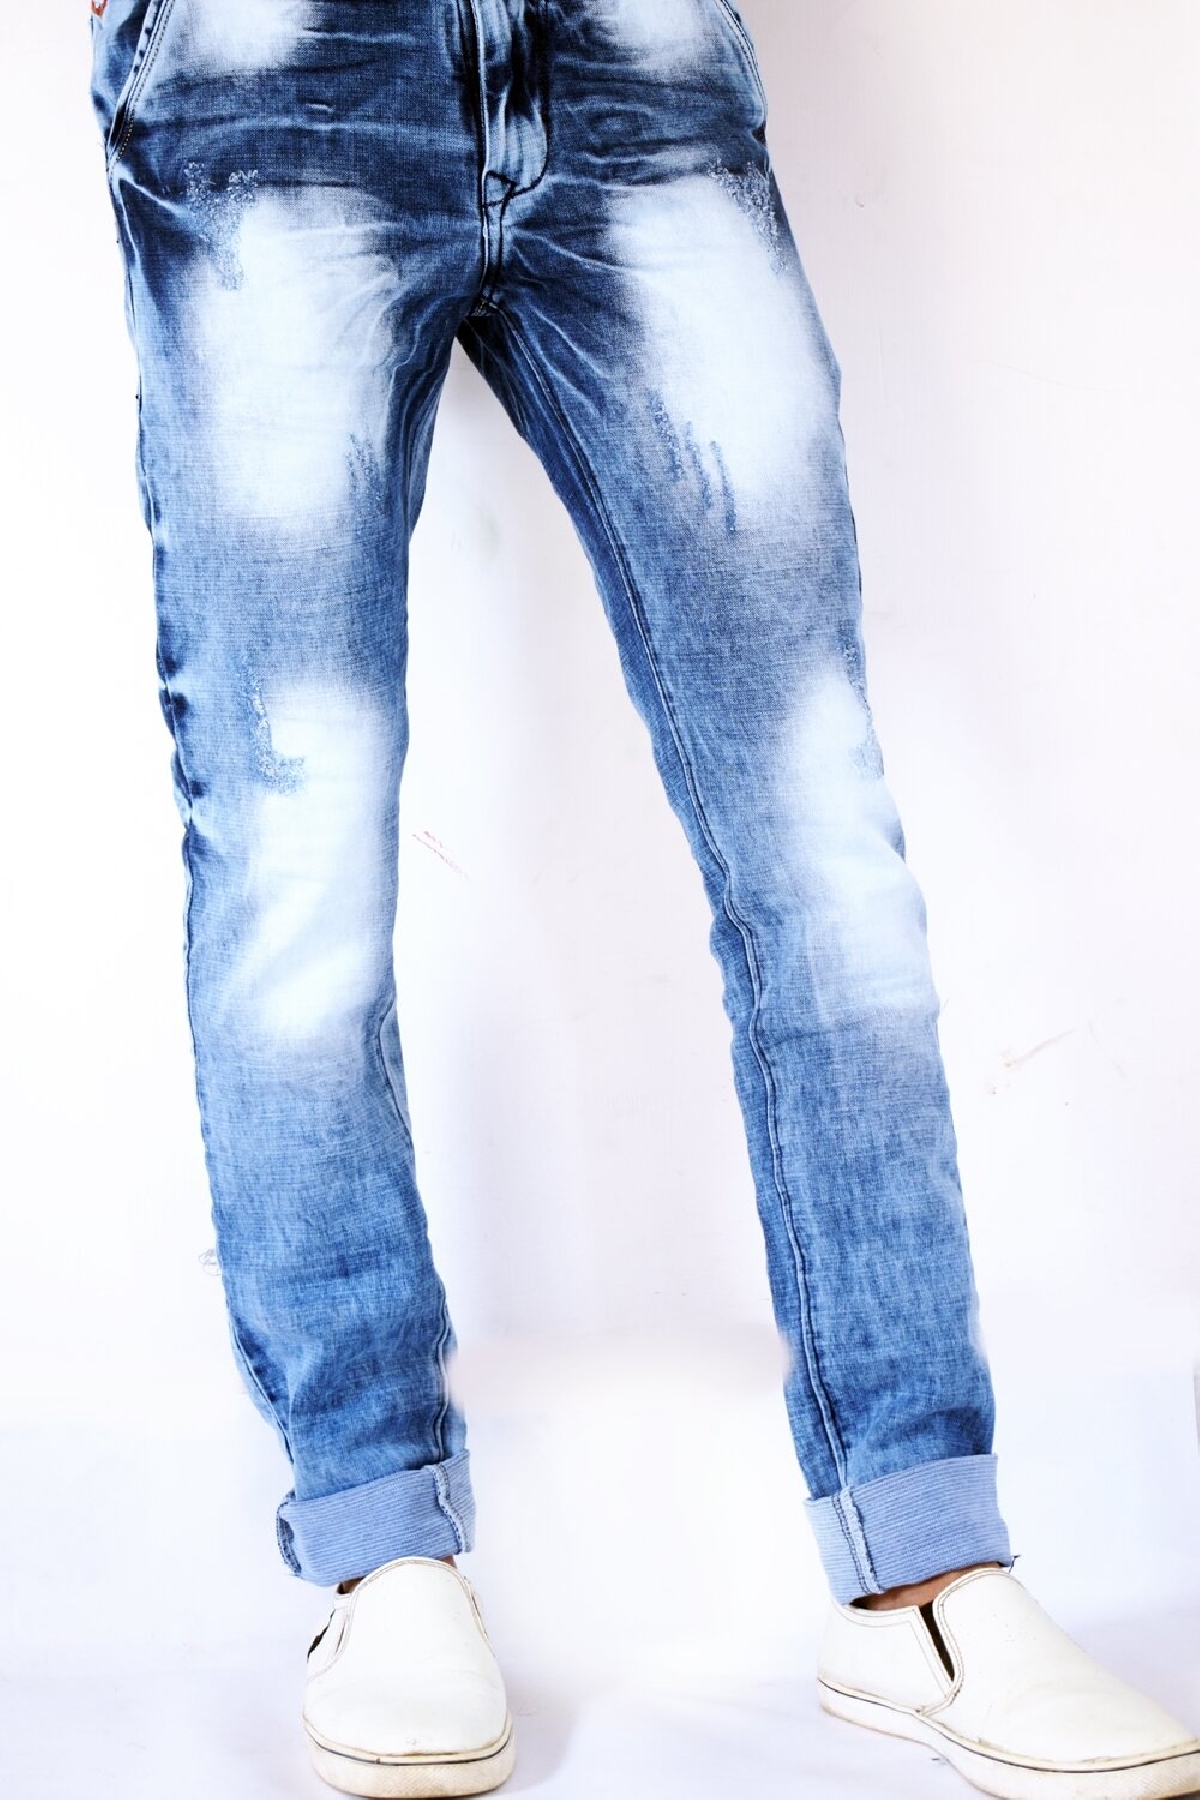 sparky jeans low price